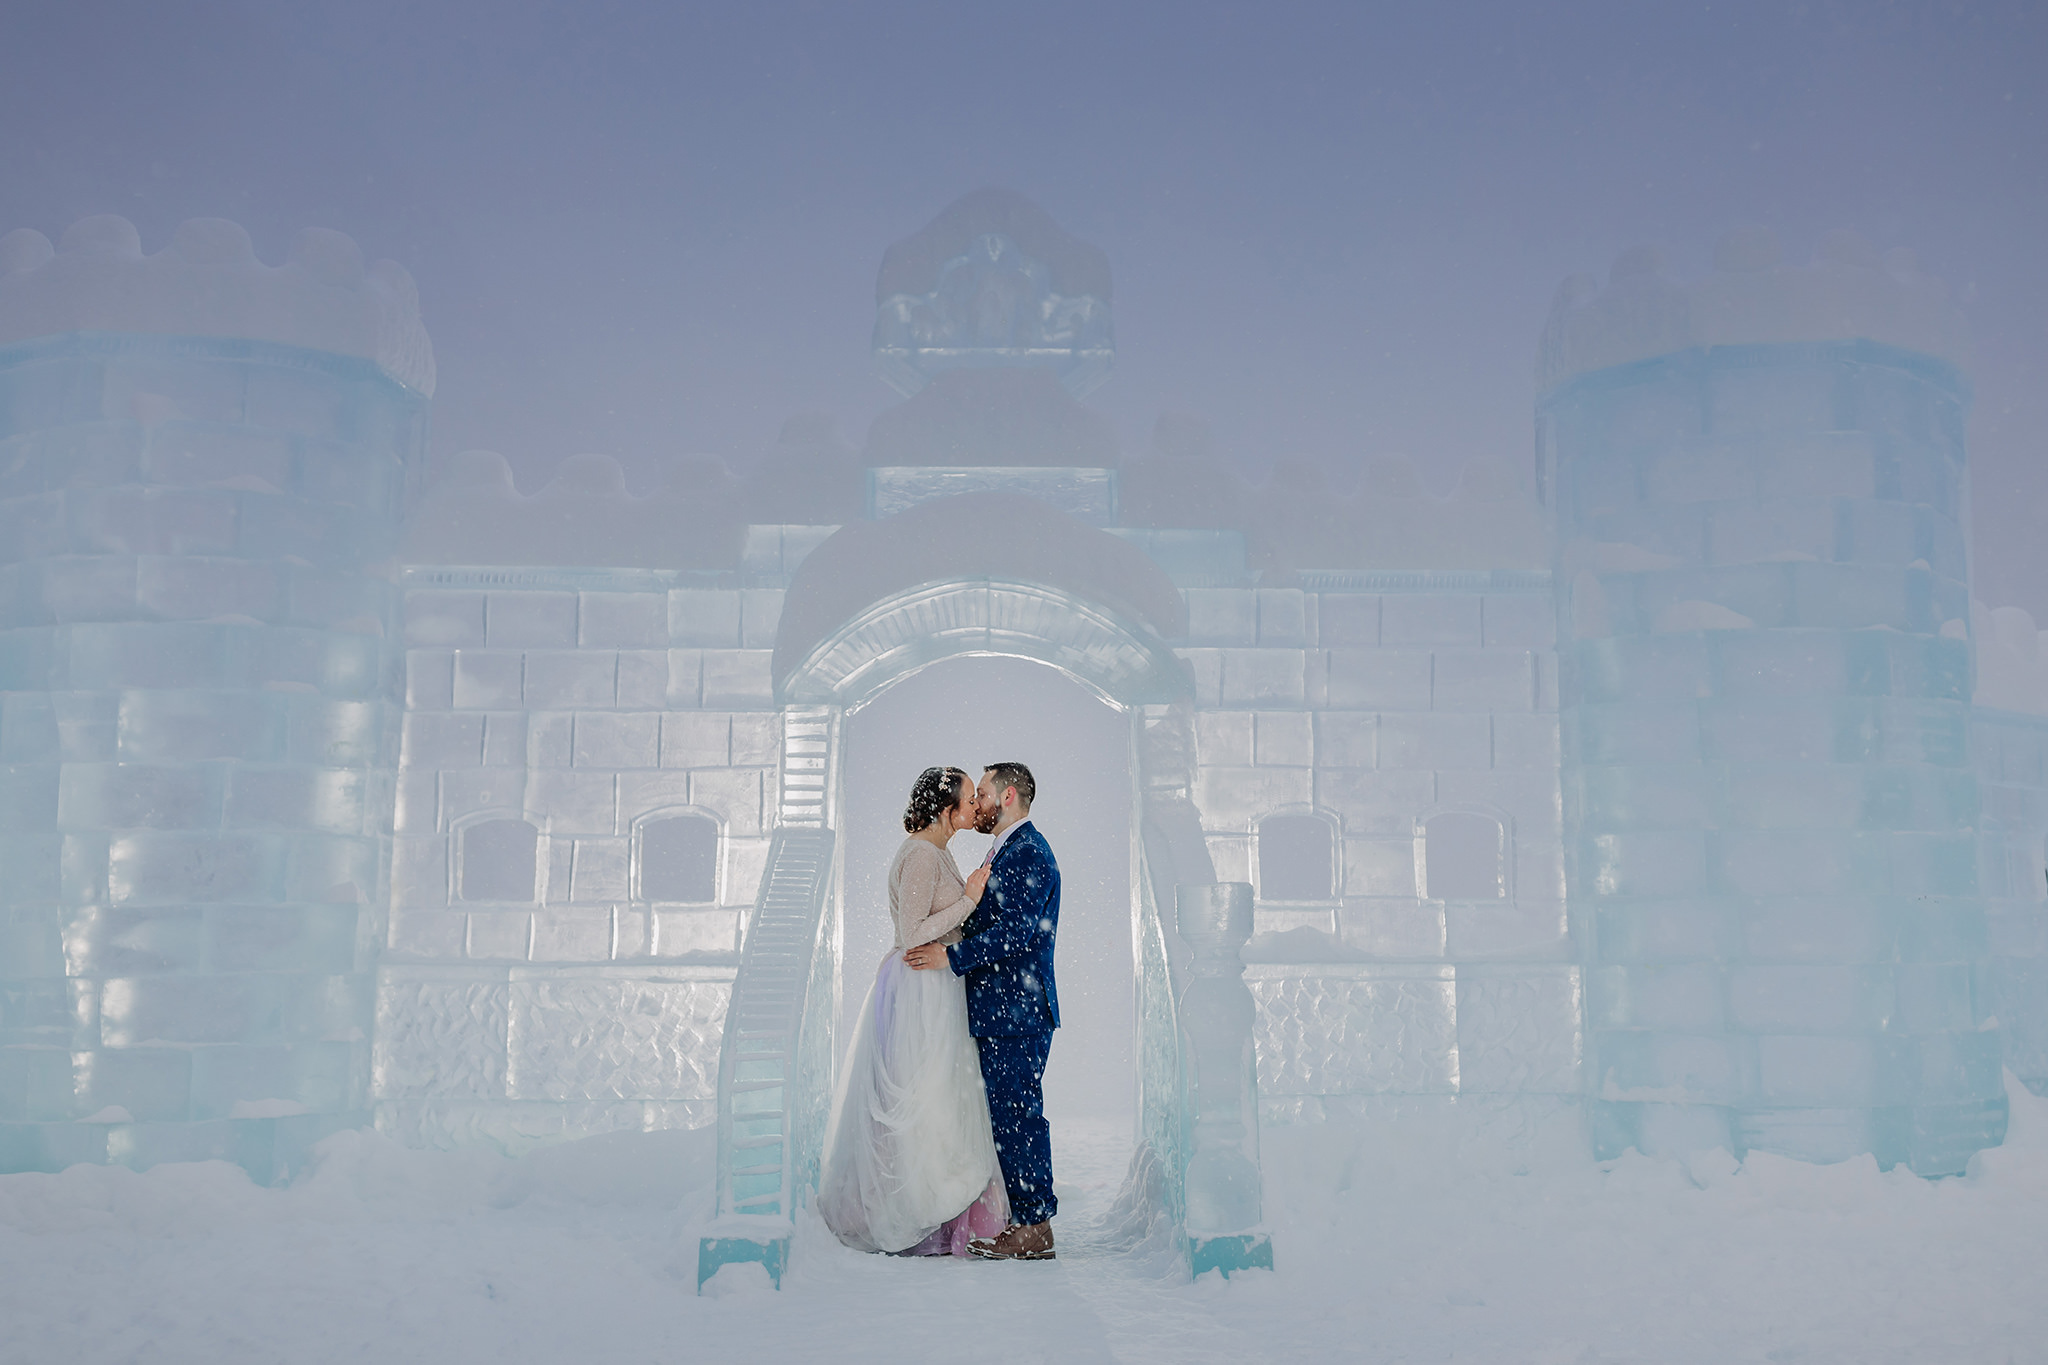 Elope in Lake Louise with a magical snowy outdoor winter wonderland